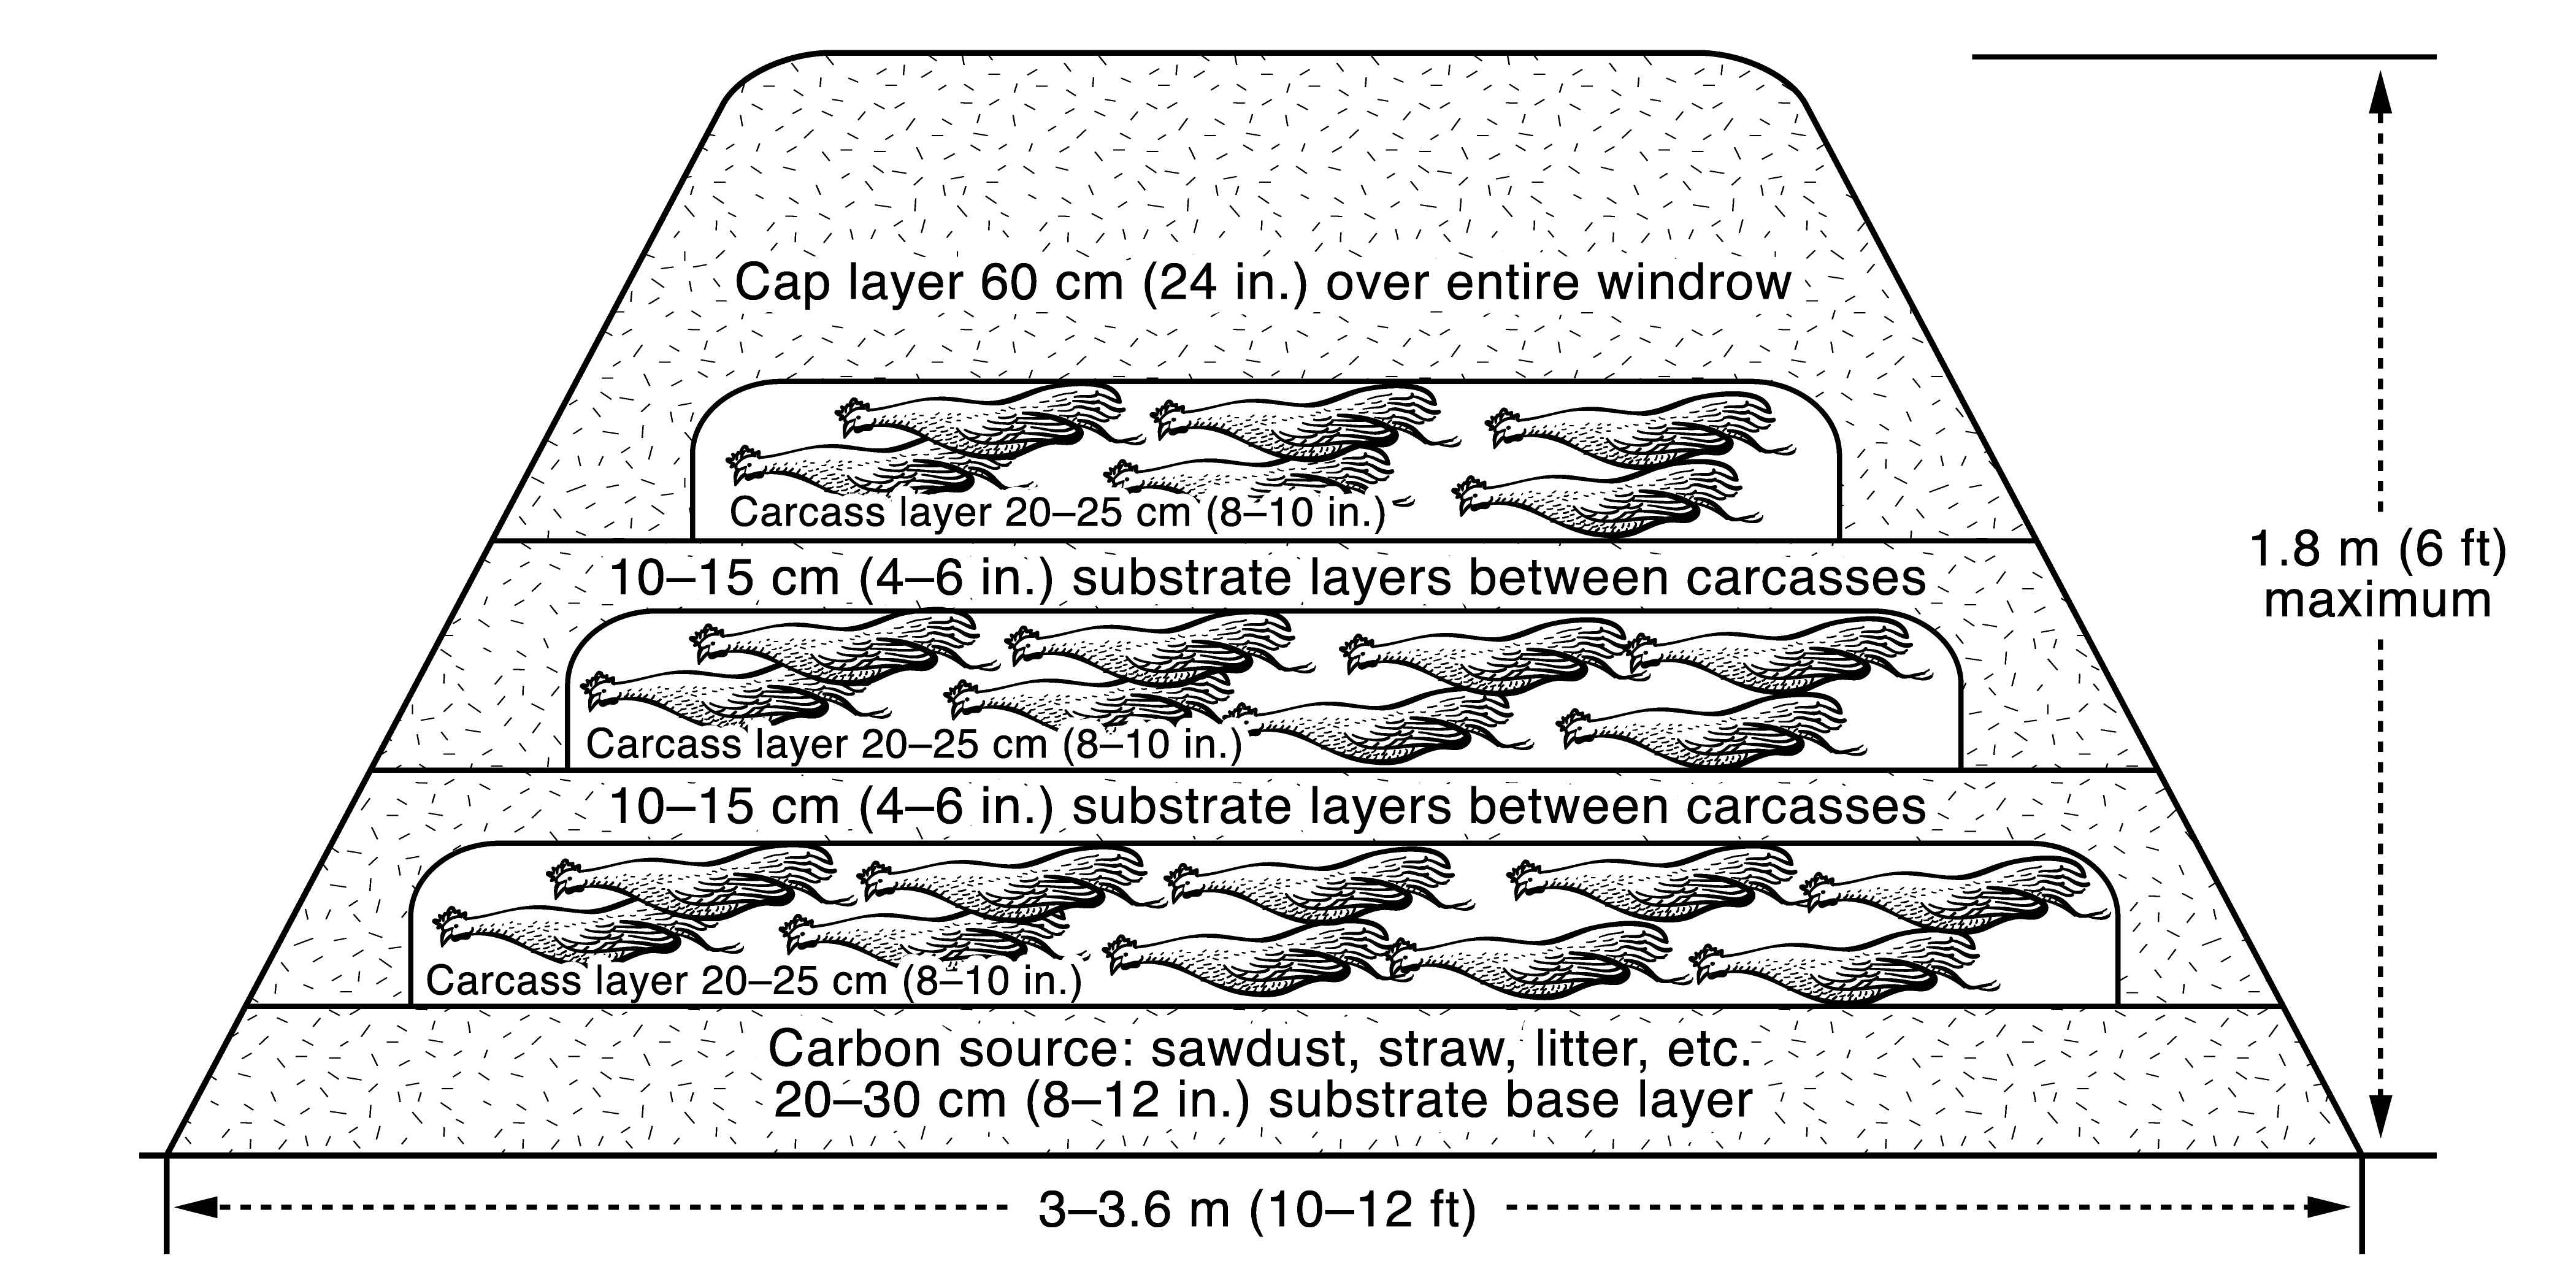 Schematic of a cross section of a carcass composting windrow created using the “layering” method. Illustration shows the various layers of substrate and carcasses found in the pile along with approximate dimensions.